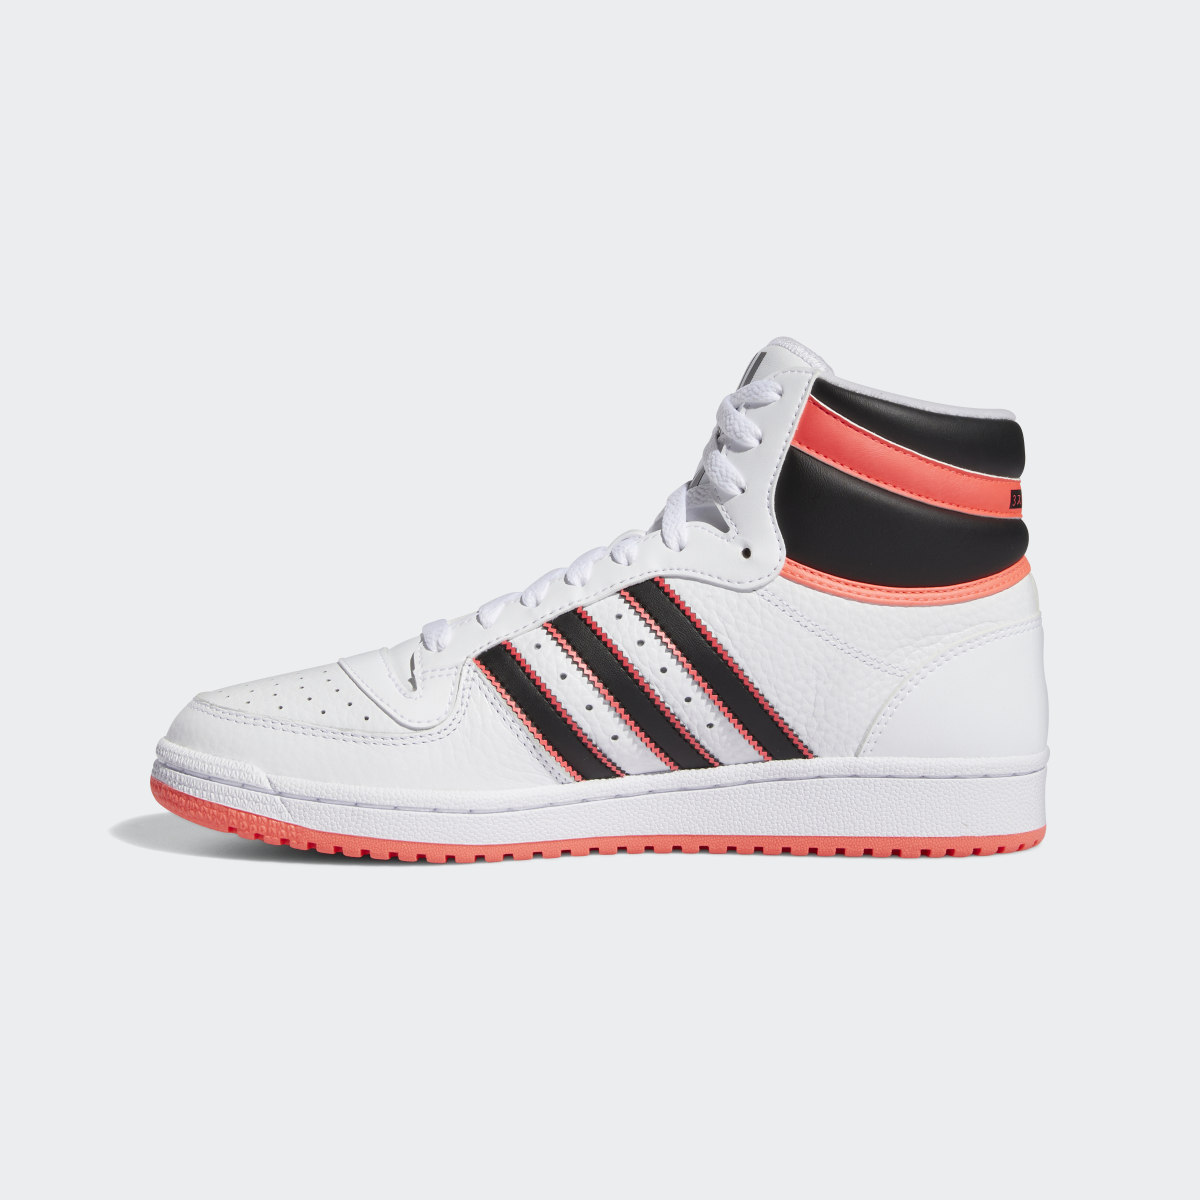 Adidas Top Ten RB Shoes. 7